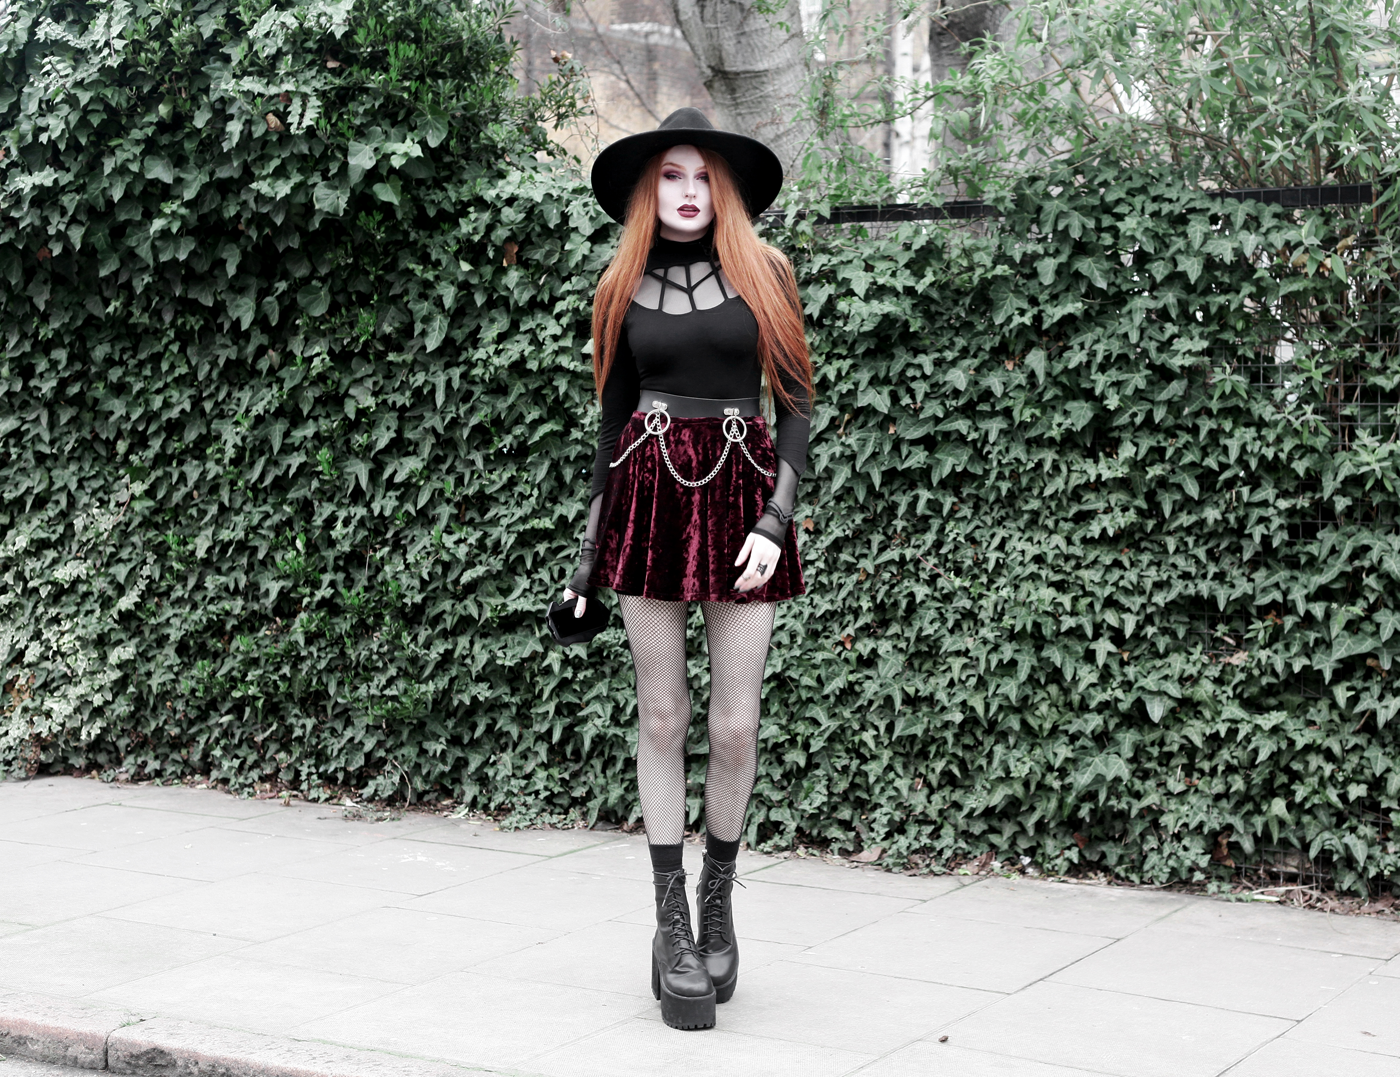 Olivia Emily wears Rogue and Wolf Moondoll Top, Killstar Fedora Hat, Crushed Velvet skirt, Mary Wyatt Chain Belt and Unif Scosche Boots